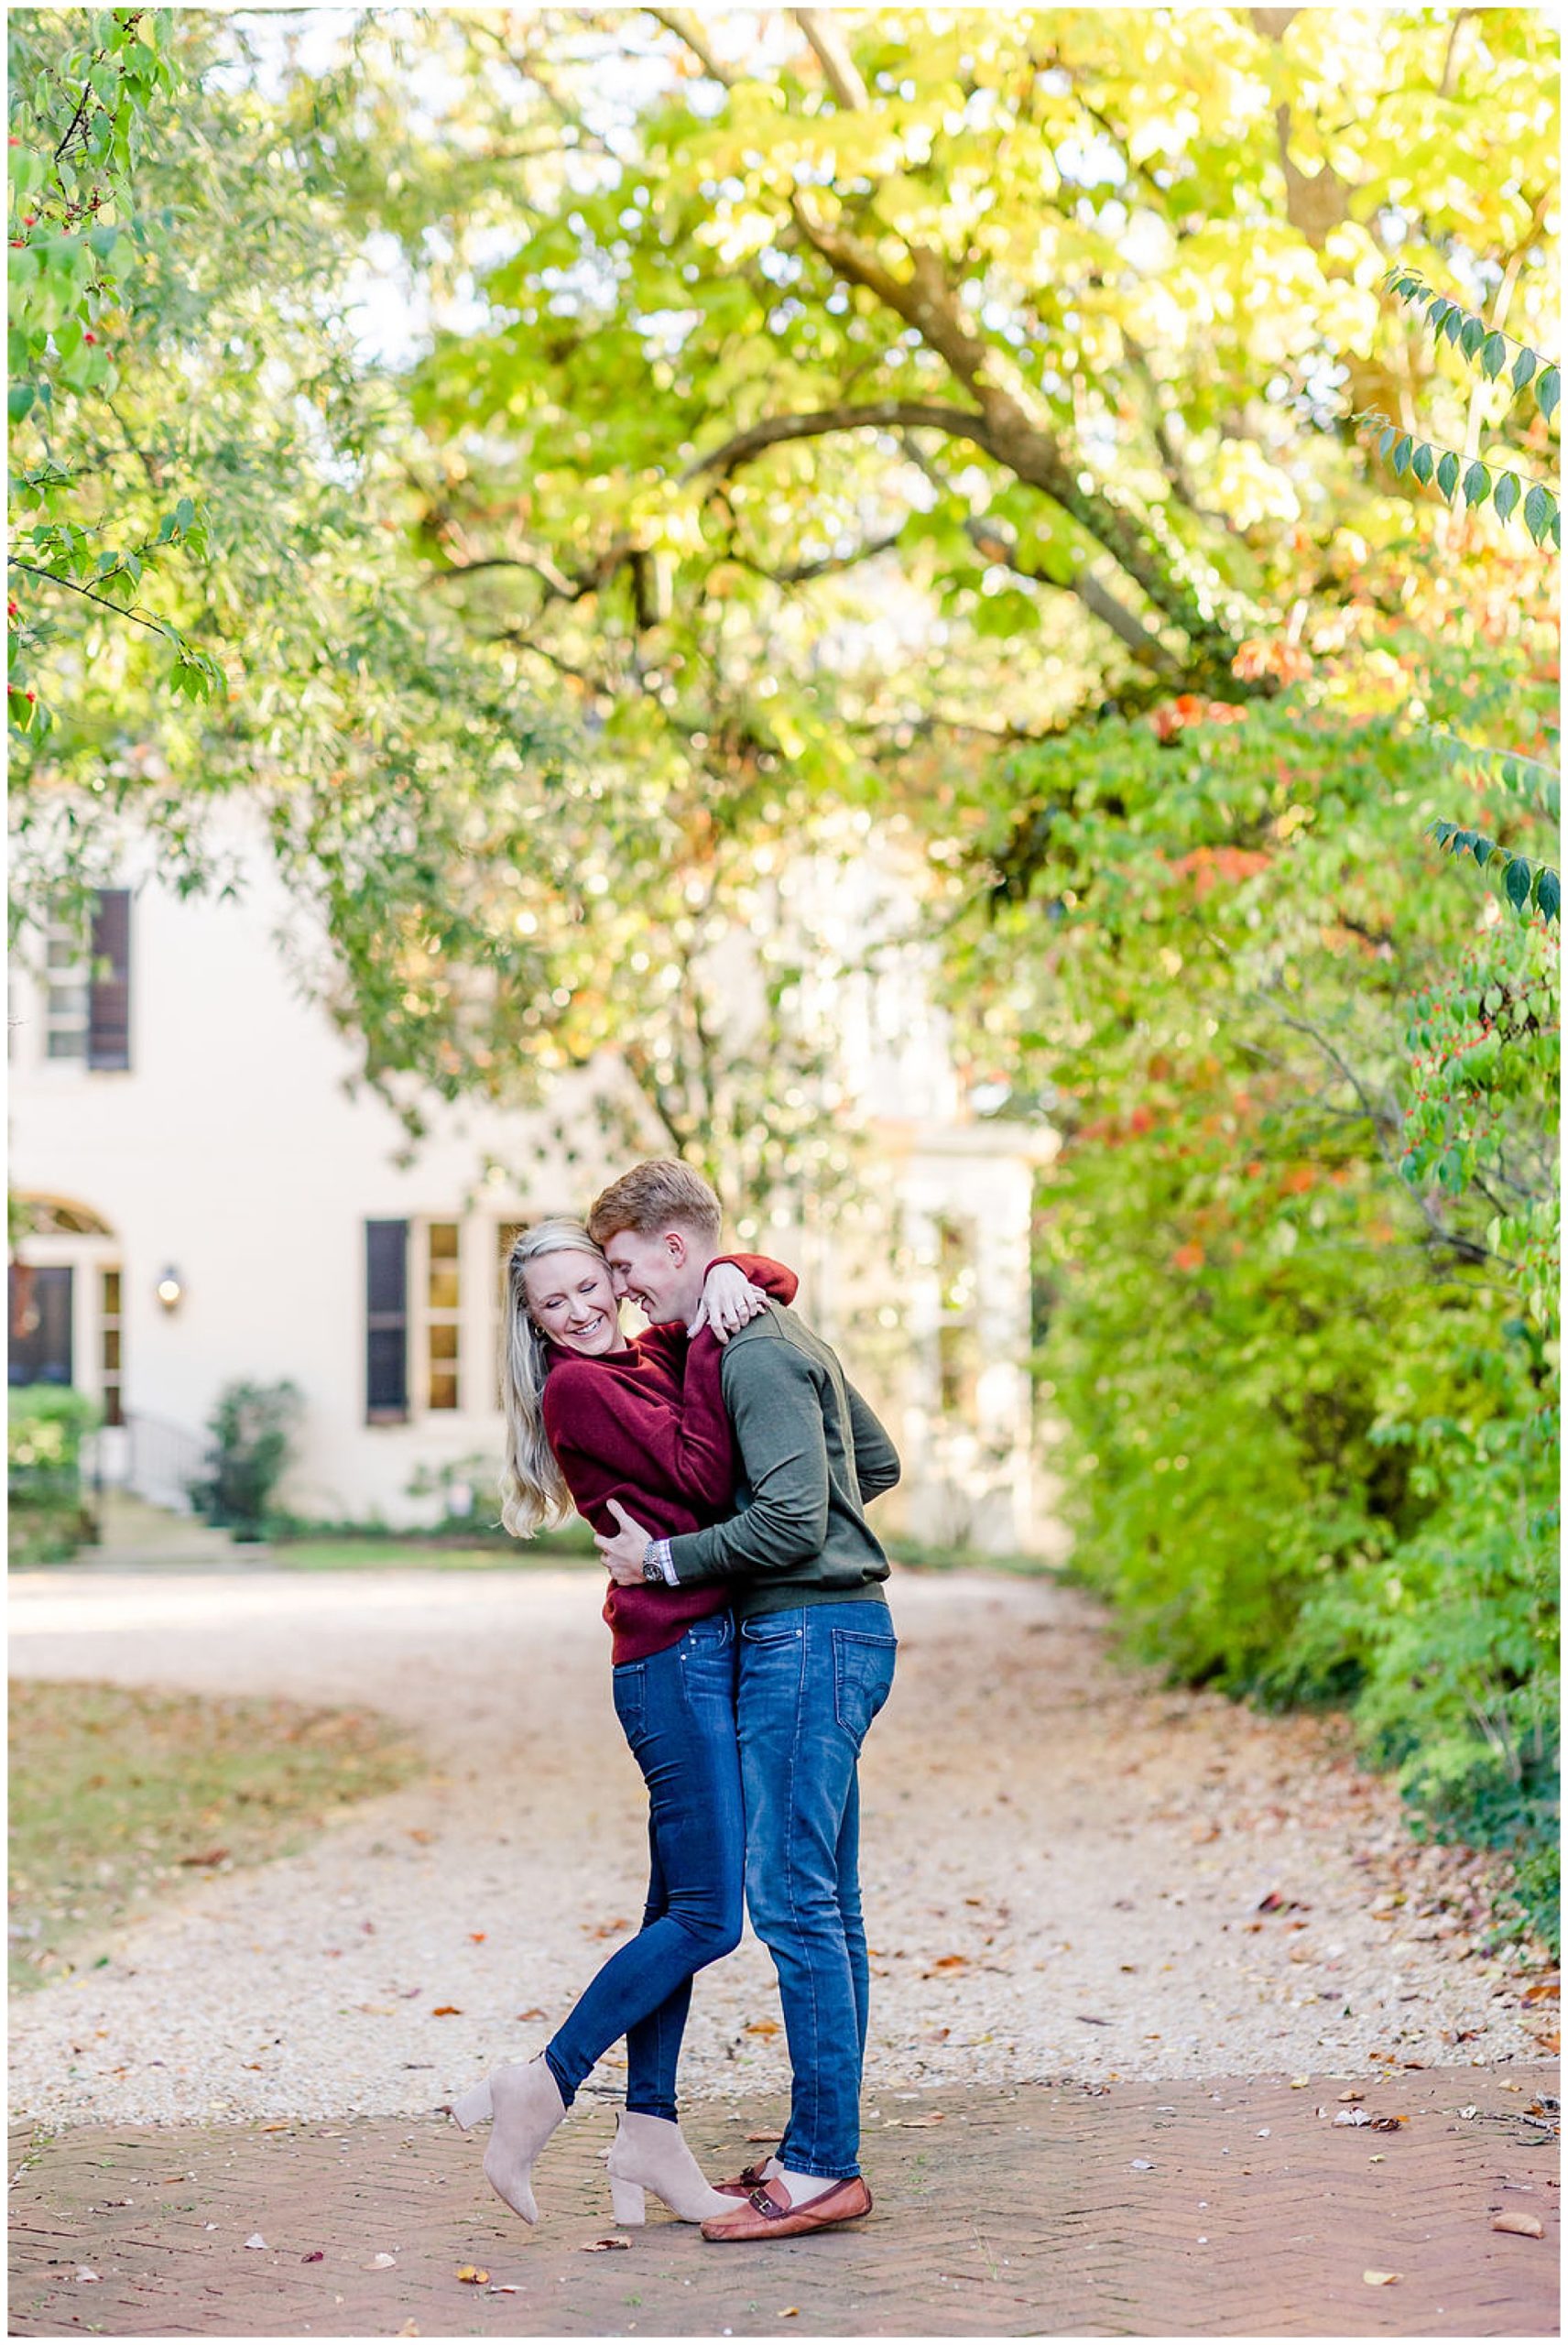 autumn magic hour engagement session, Washington D.C. engagement photos, Georgetown engagement photos, autumn engagement photos, DC portraits, DC engagement portraits, save the dates photos, Rachel E.H. Photography, man with head resting on side of woman's face, woman smiling